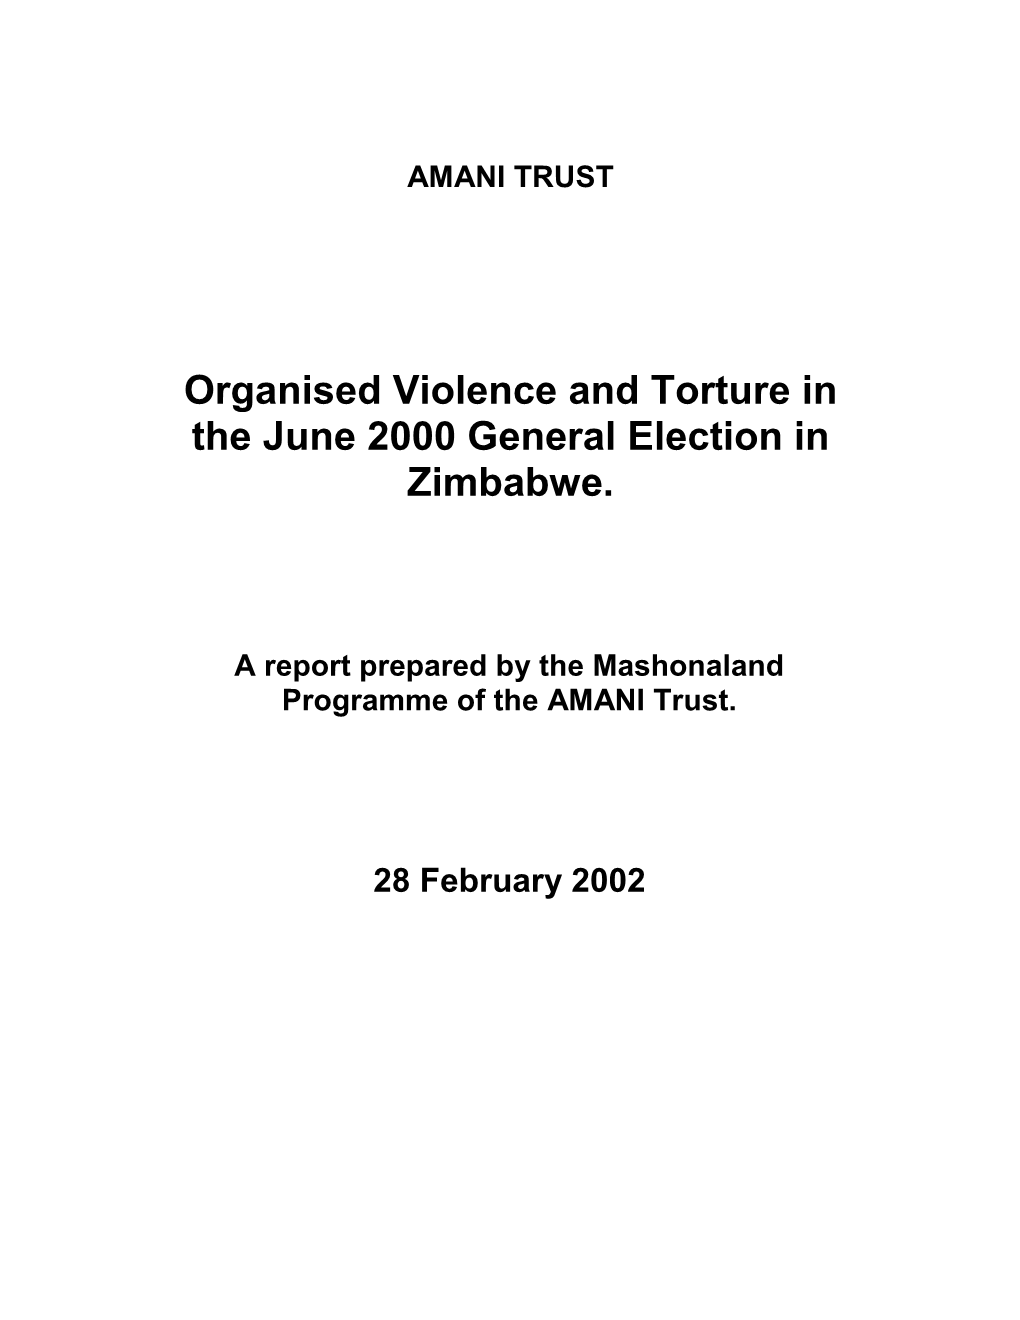 Organised Violence and Torture in the June 2000 General Election and Subsequent Bye-Elections in Zimbab